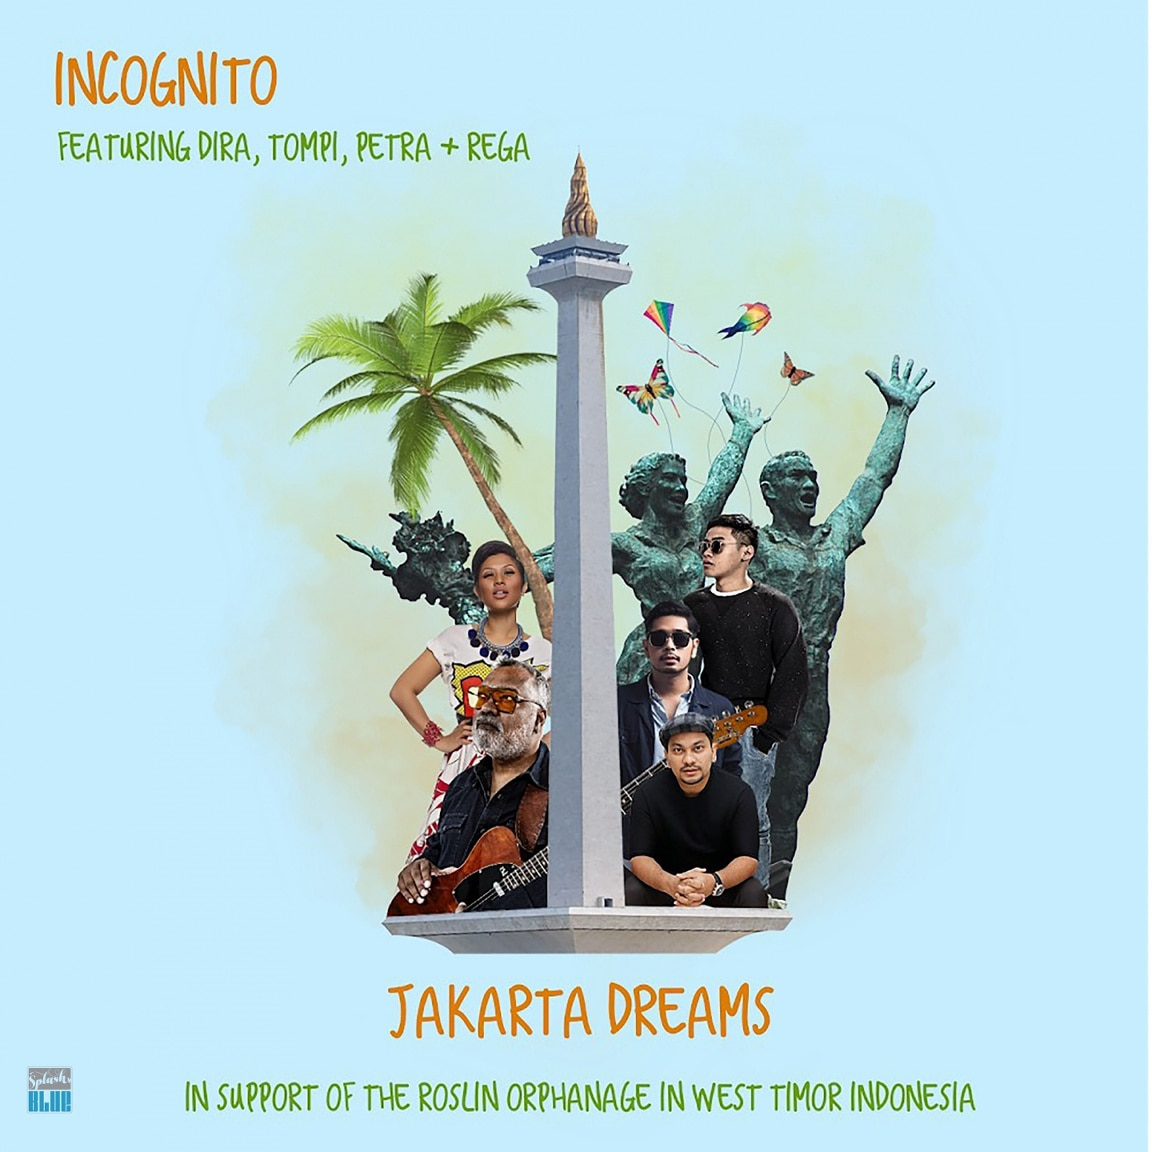 Incognito-Jakarta Dreams (feat. Dira, Tompi, Petra, Rega) (In Support Of The Roslin Orphanage In West Timor Indonesia)